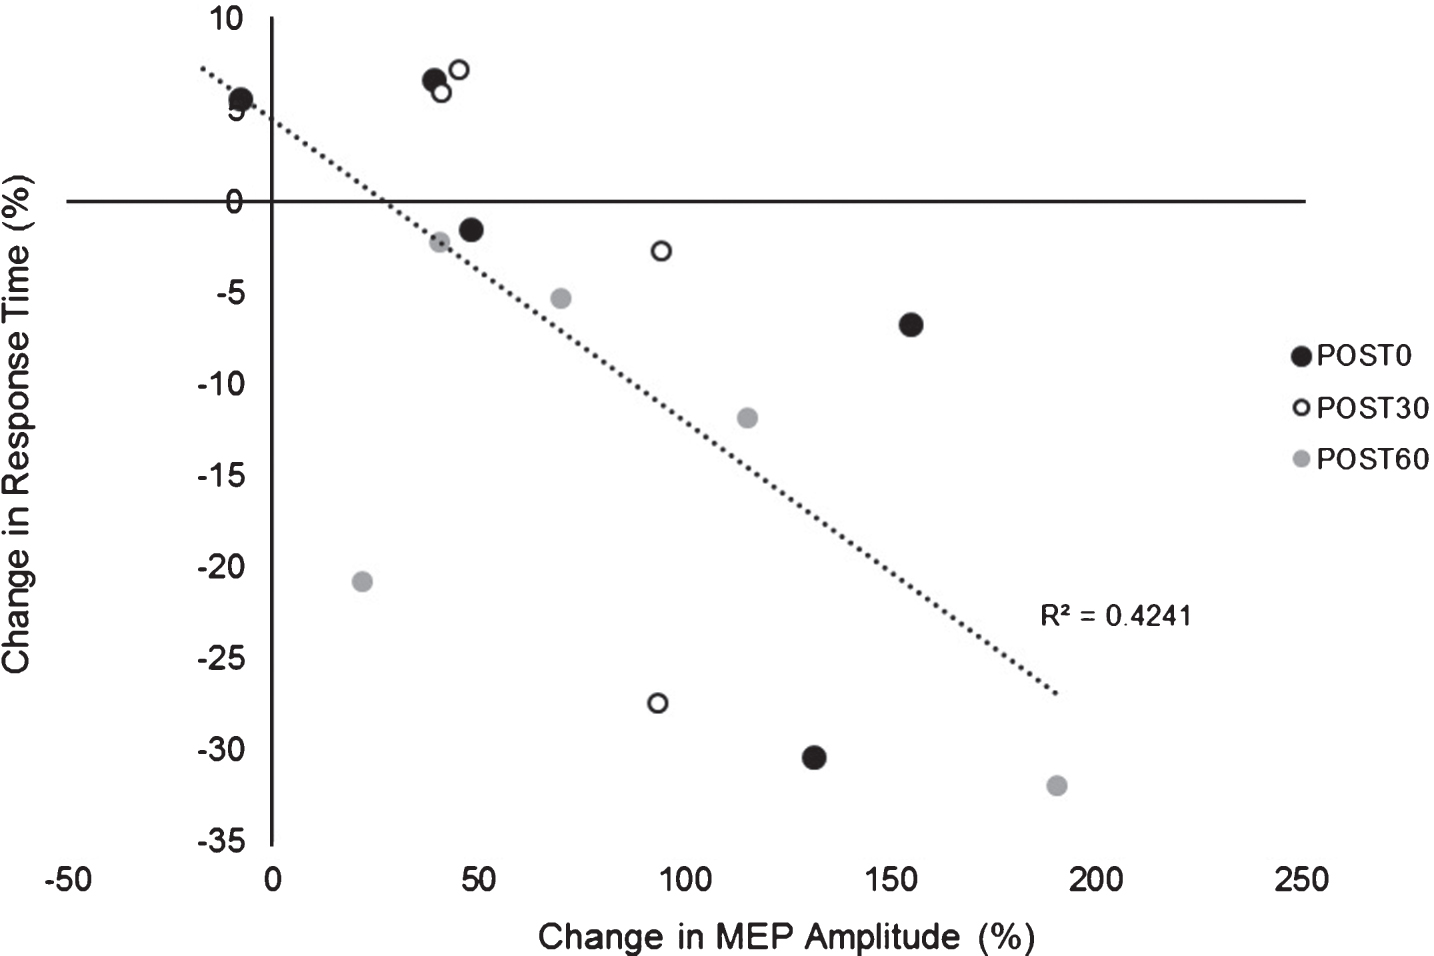 Relationship between change in MEP amplitude (1 mV) (mean±SE) versus change in SRTT RT. Exploratory analyses showed a negative relationship between change in MEP amplitude change in RT across POST testing time points suggesting greater PAS-induced increases in cortical excitability were associated with larger improvements in motor skill performance (lower RTs).